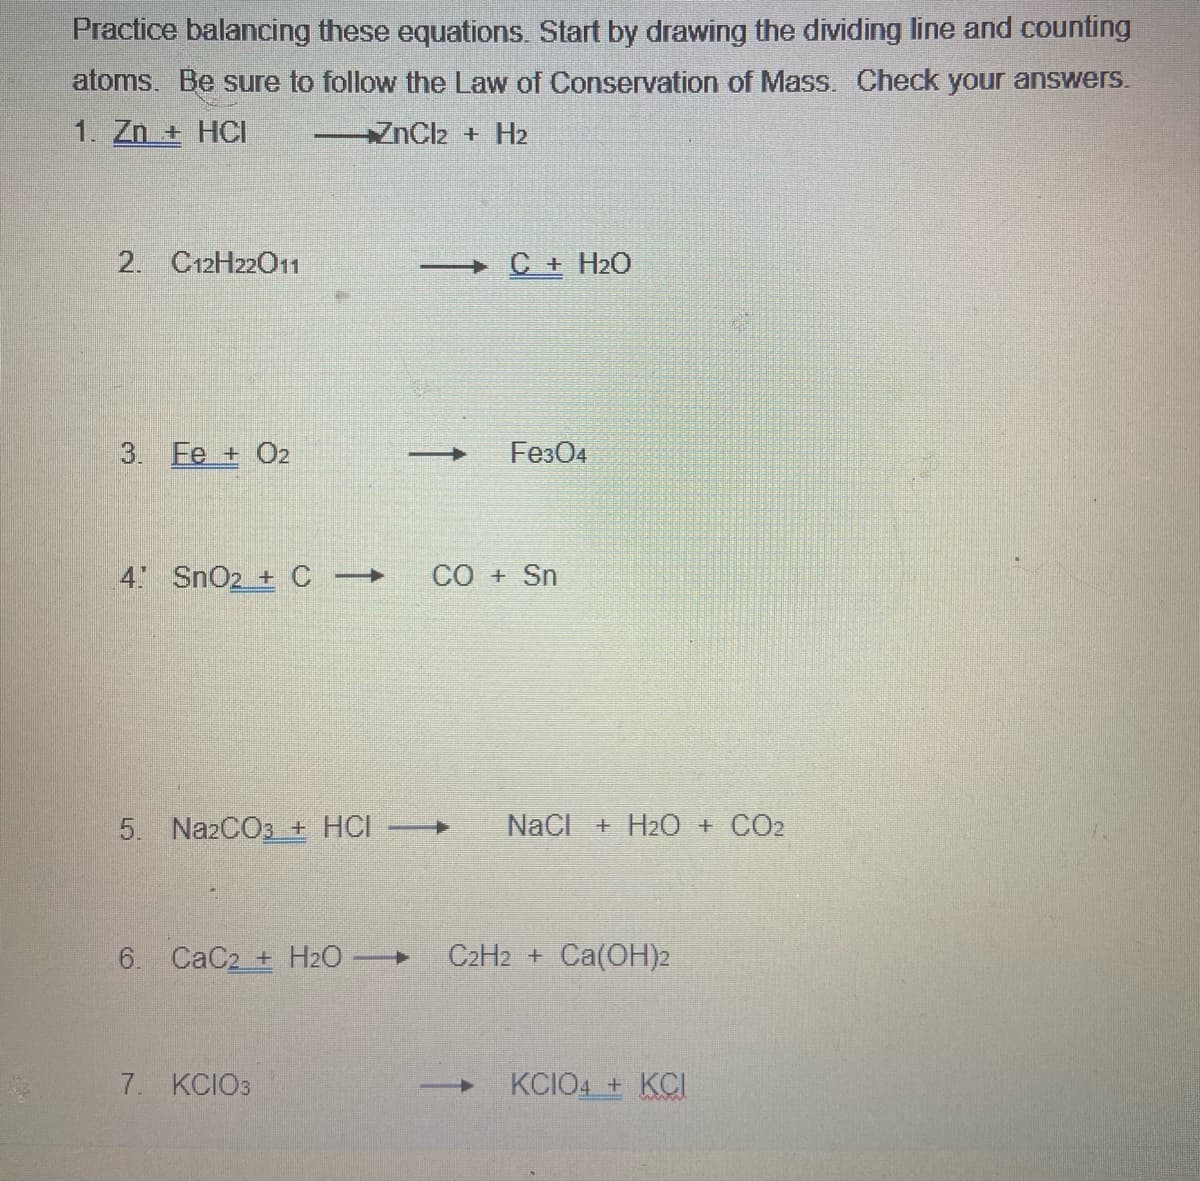 Practice balancing these equations. Start by drawing the dividing line and counting
atoms. Be sure to follow the Law of Conservation of Mass. Check your answers.
1. Zn + HCI
ZnCl2 + H2
2. C12H2201
C + H2O
3. Ee + O2
Fe304
4 SnO2 + C
CO + Sn
5. Na2CO3 + HCI
NaCI + H2O + CO2
6. CaC2 + H2O
C2H2 + Ca(OH)2
7. KCIO3
KCIO4 + KCI
